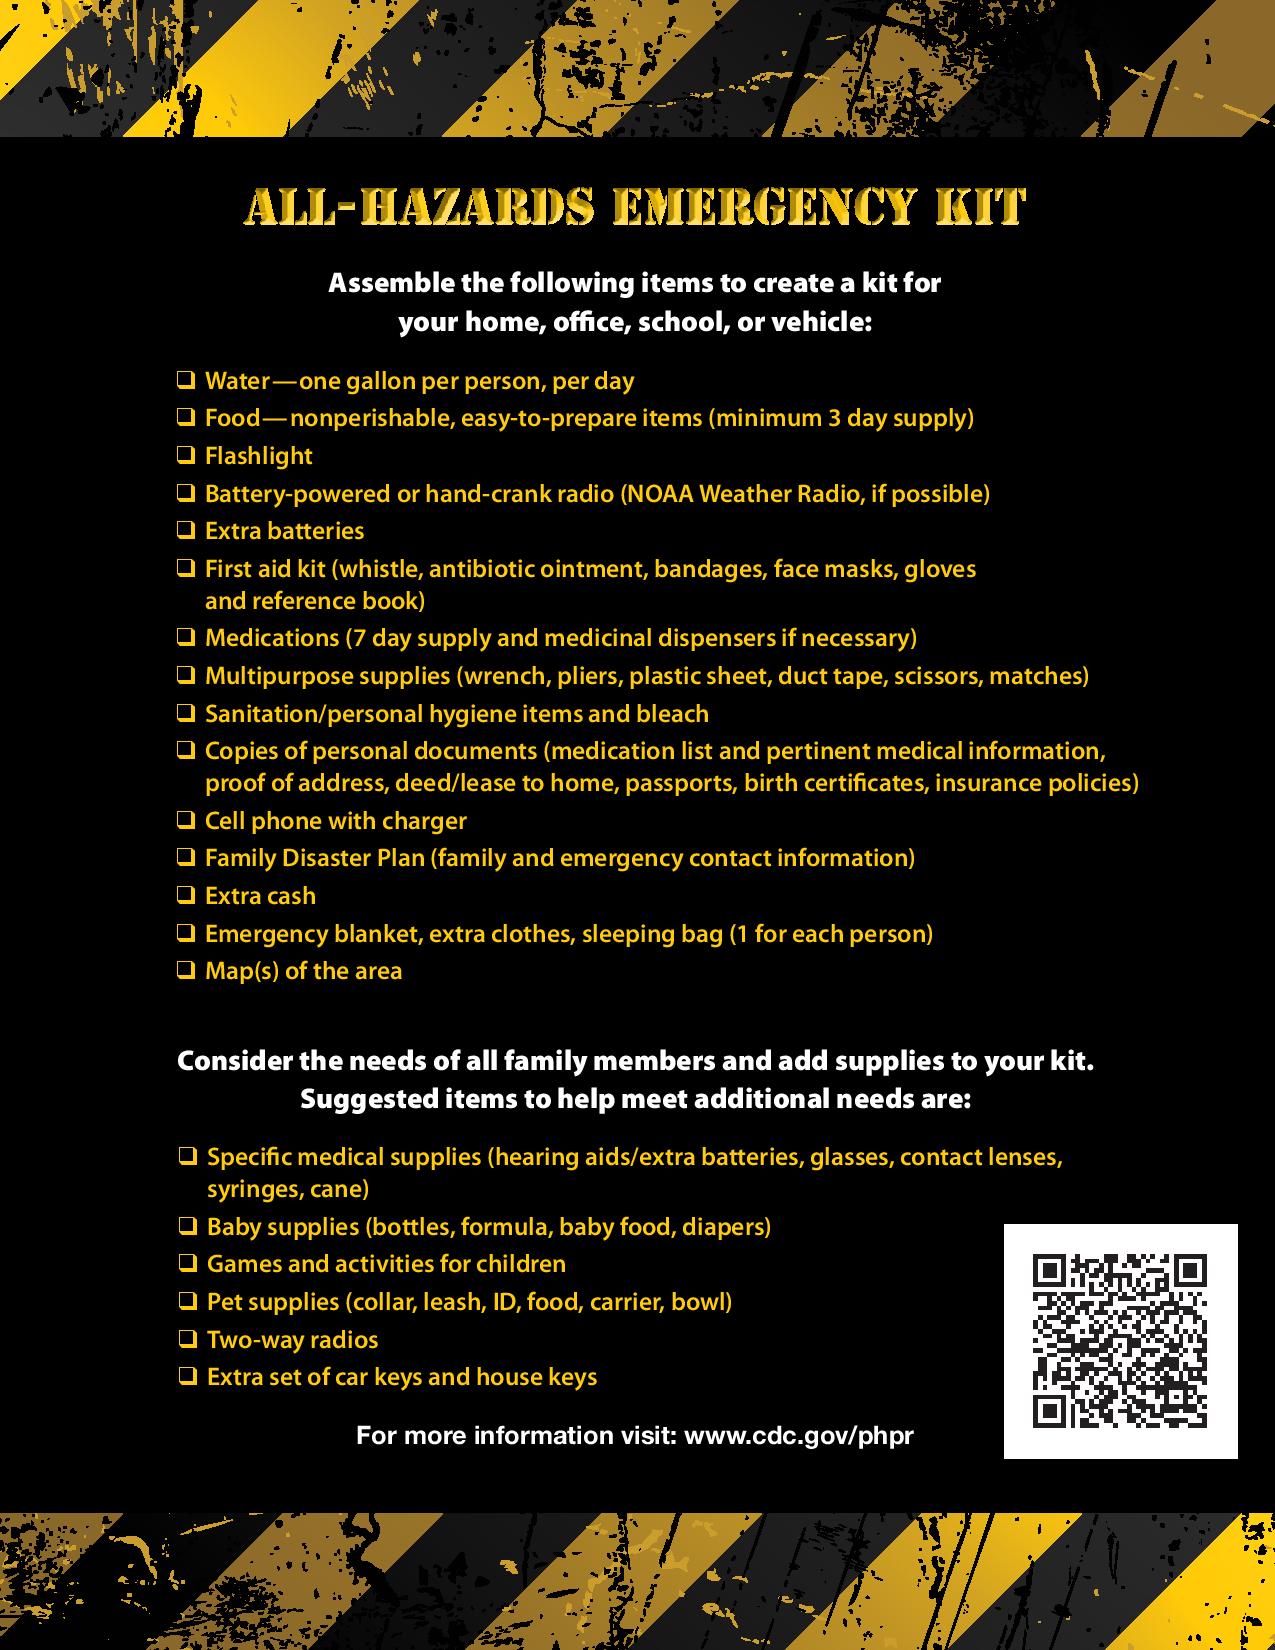 Read online Preparedness 101: A Zombie Pandemic comic -  Issue # Full - 35